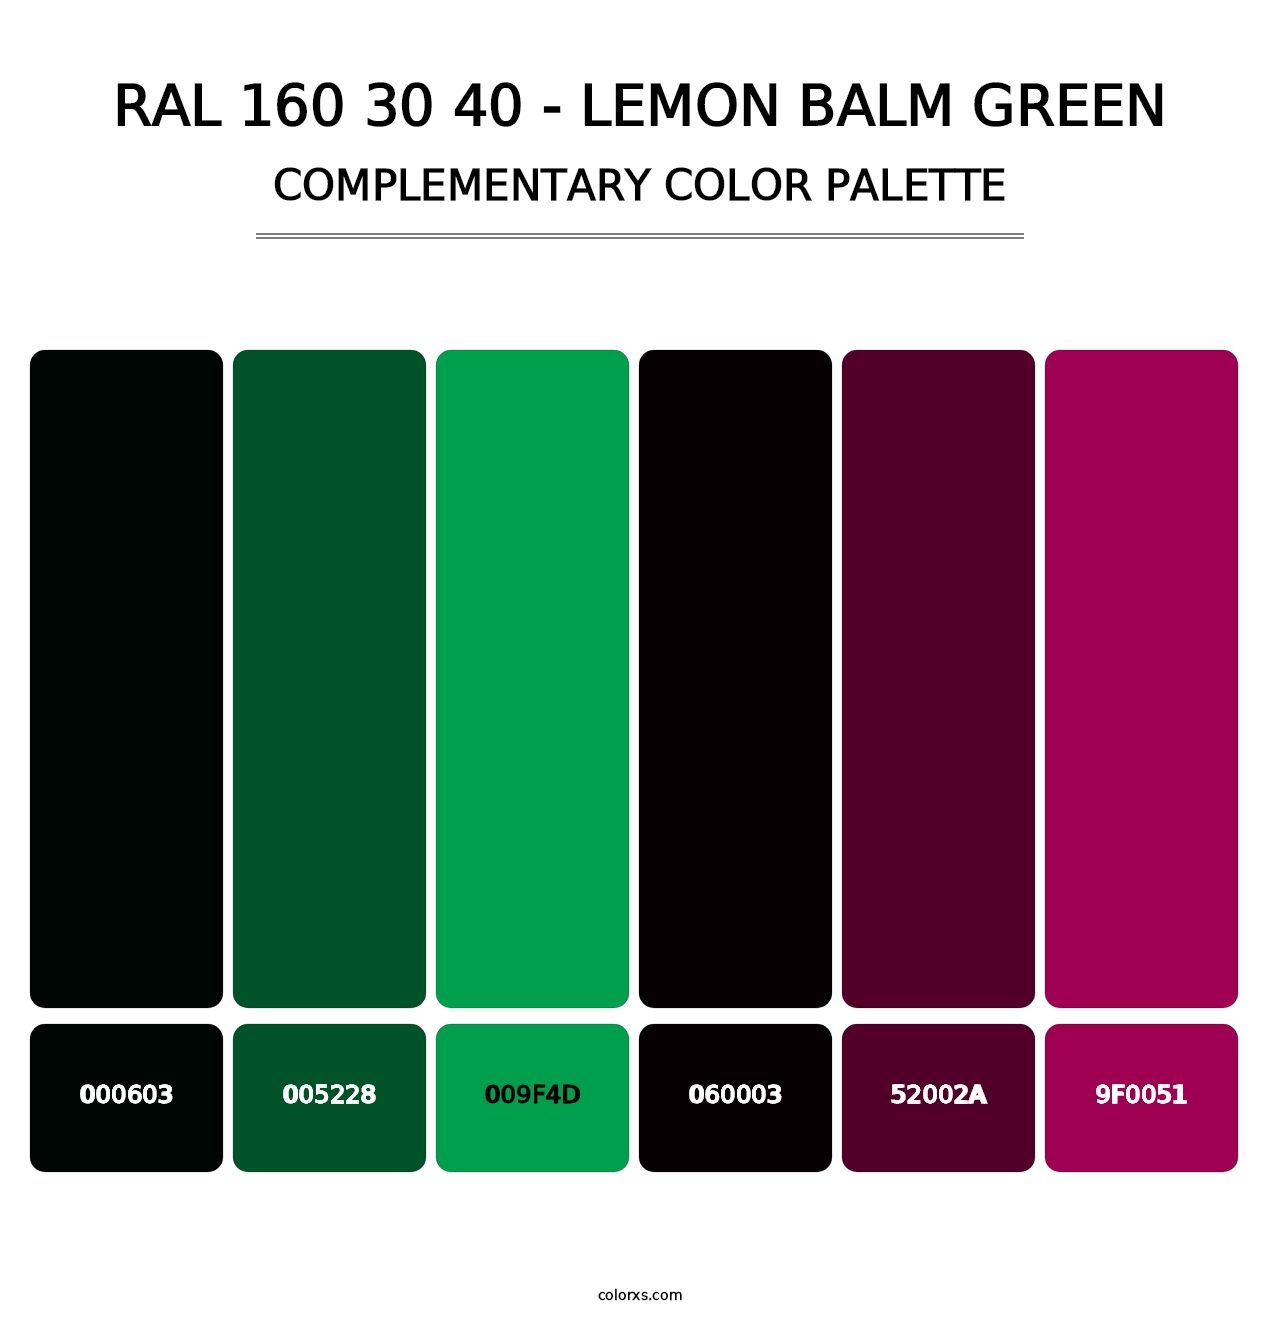 RAL 160 30 40 - Lemon Balm Green - Complementary Color Palette